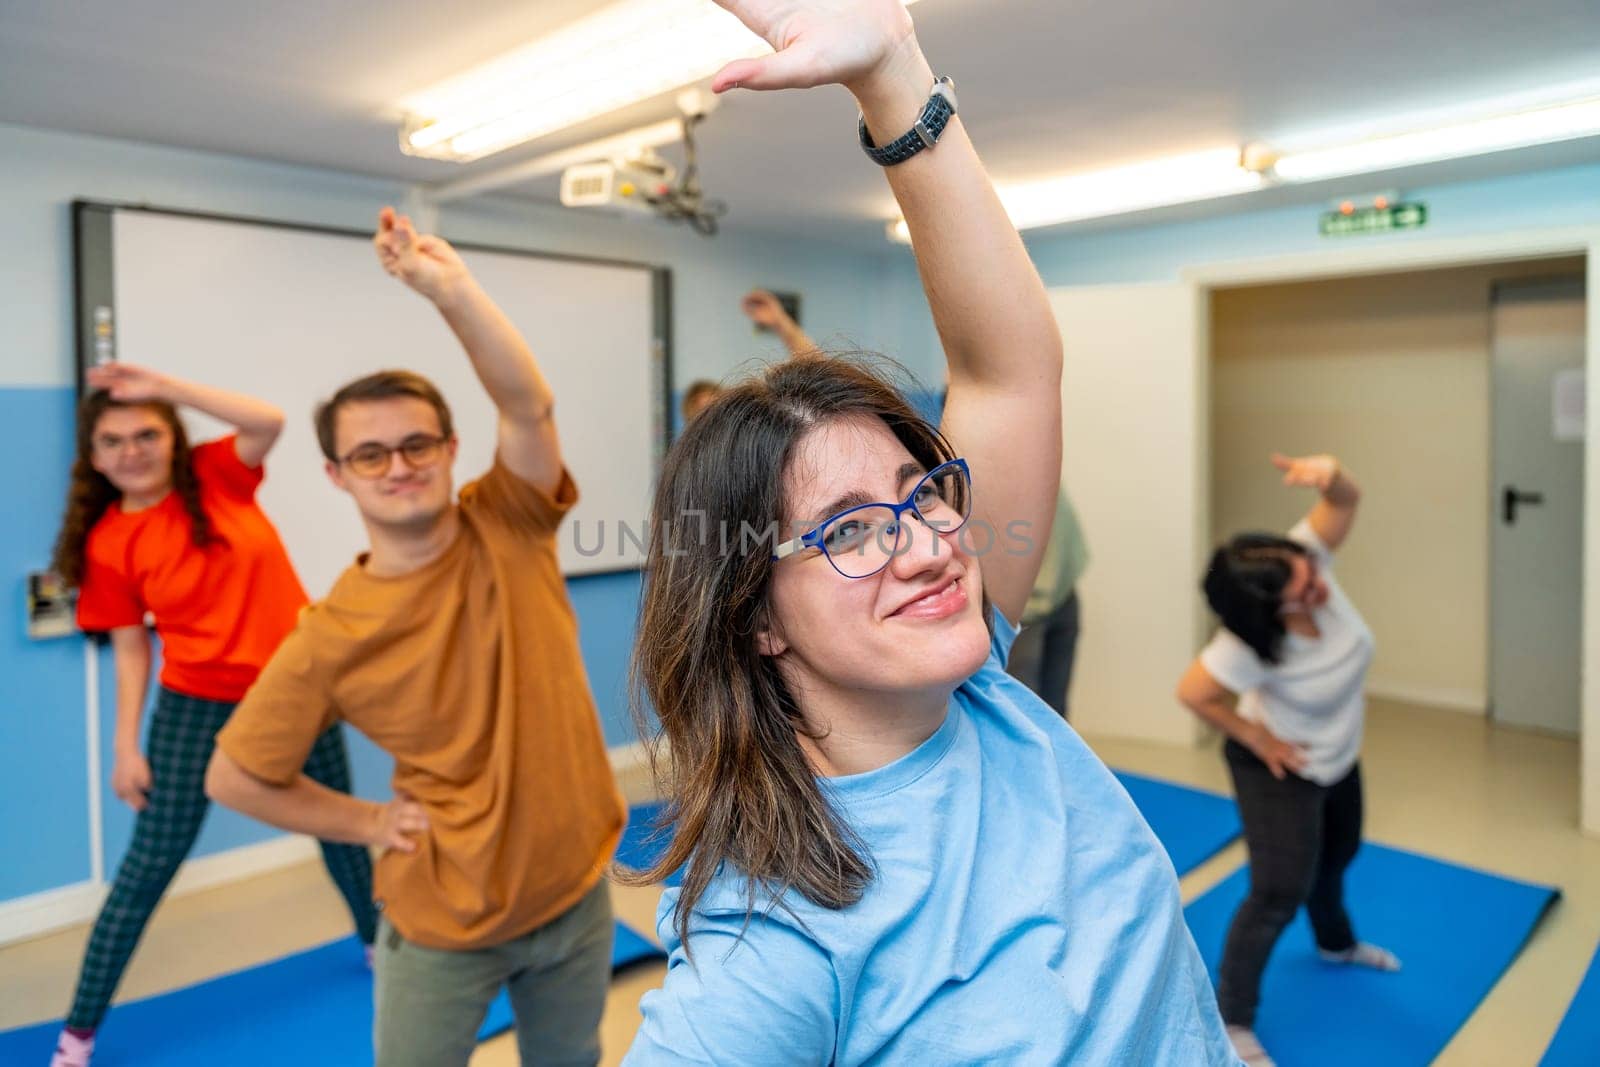 Happy people with special needs exercising in a gym by Huizi